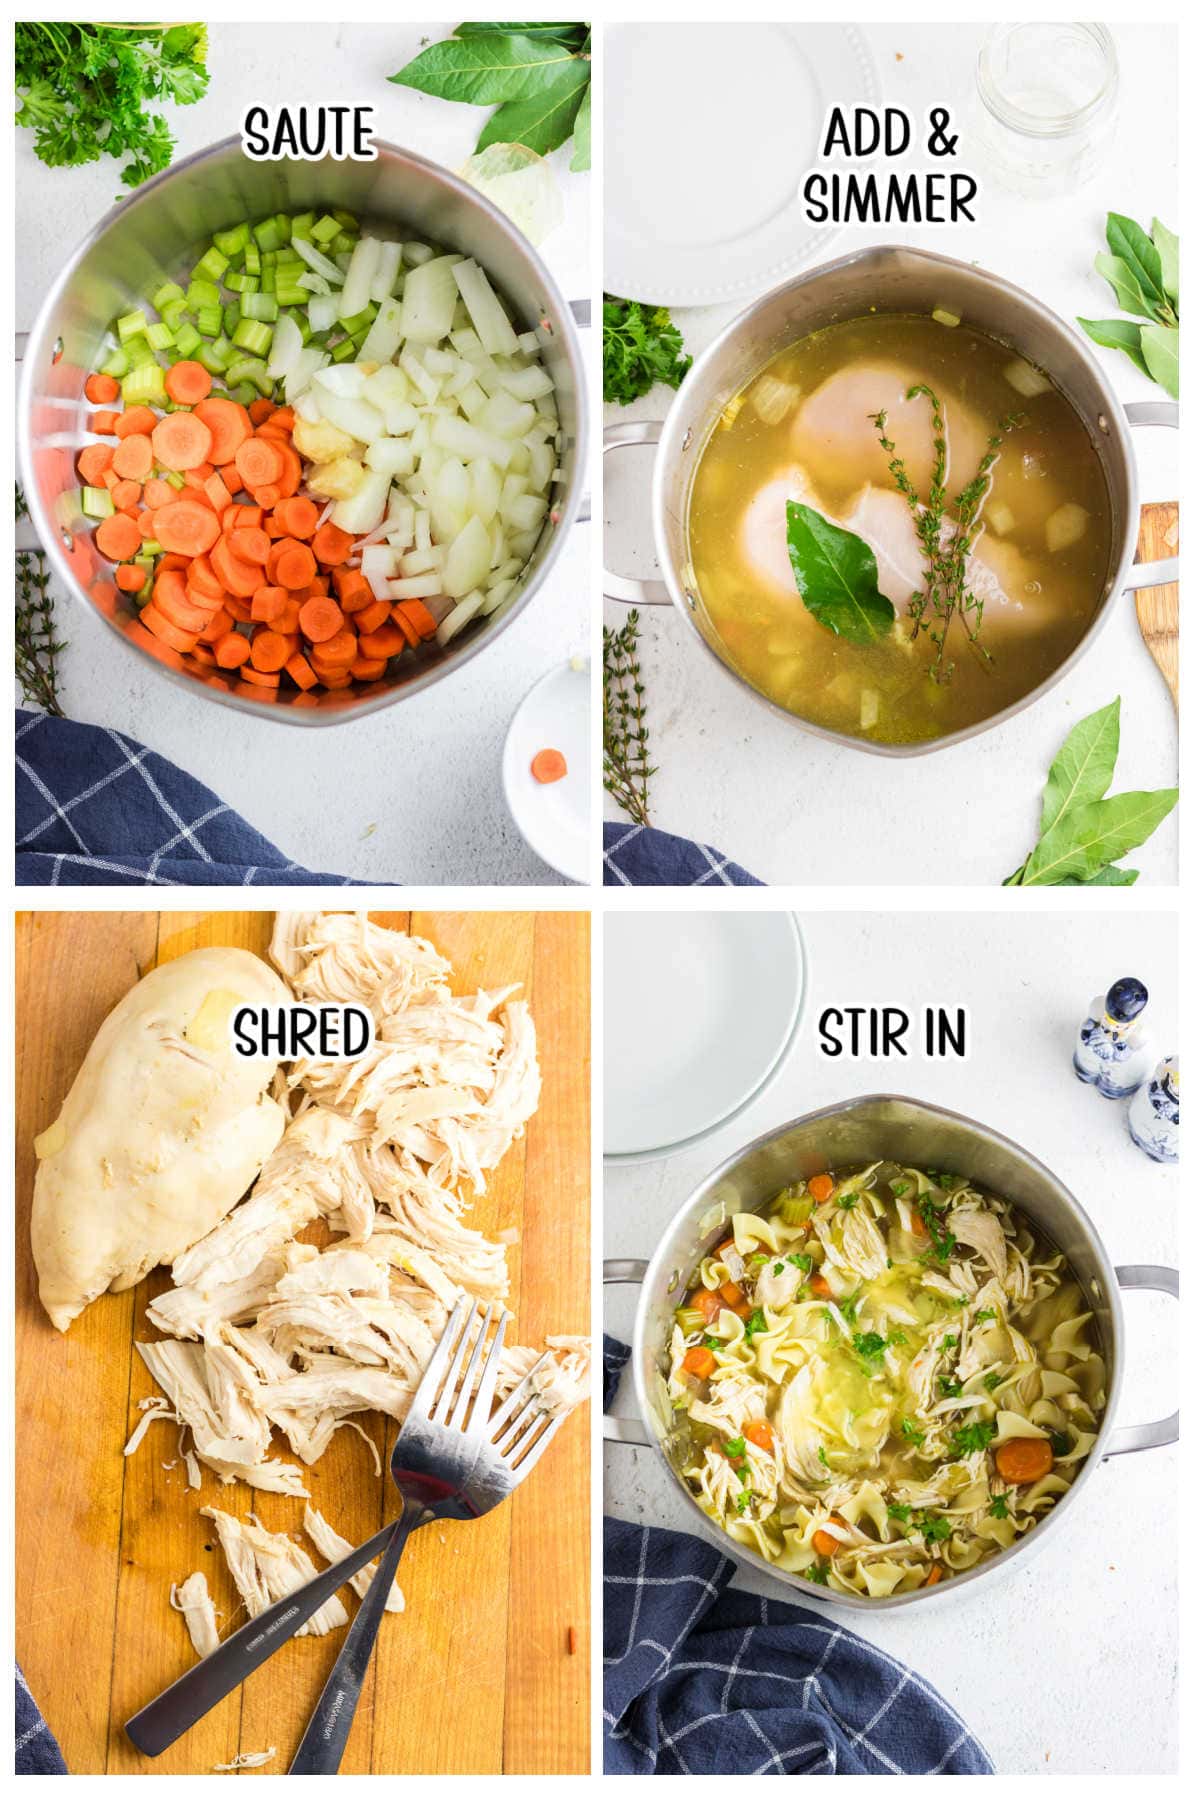 Step by step images showing how to make panera chicken noodle soup.